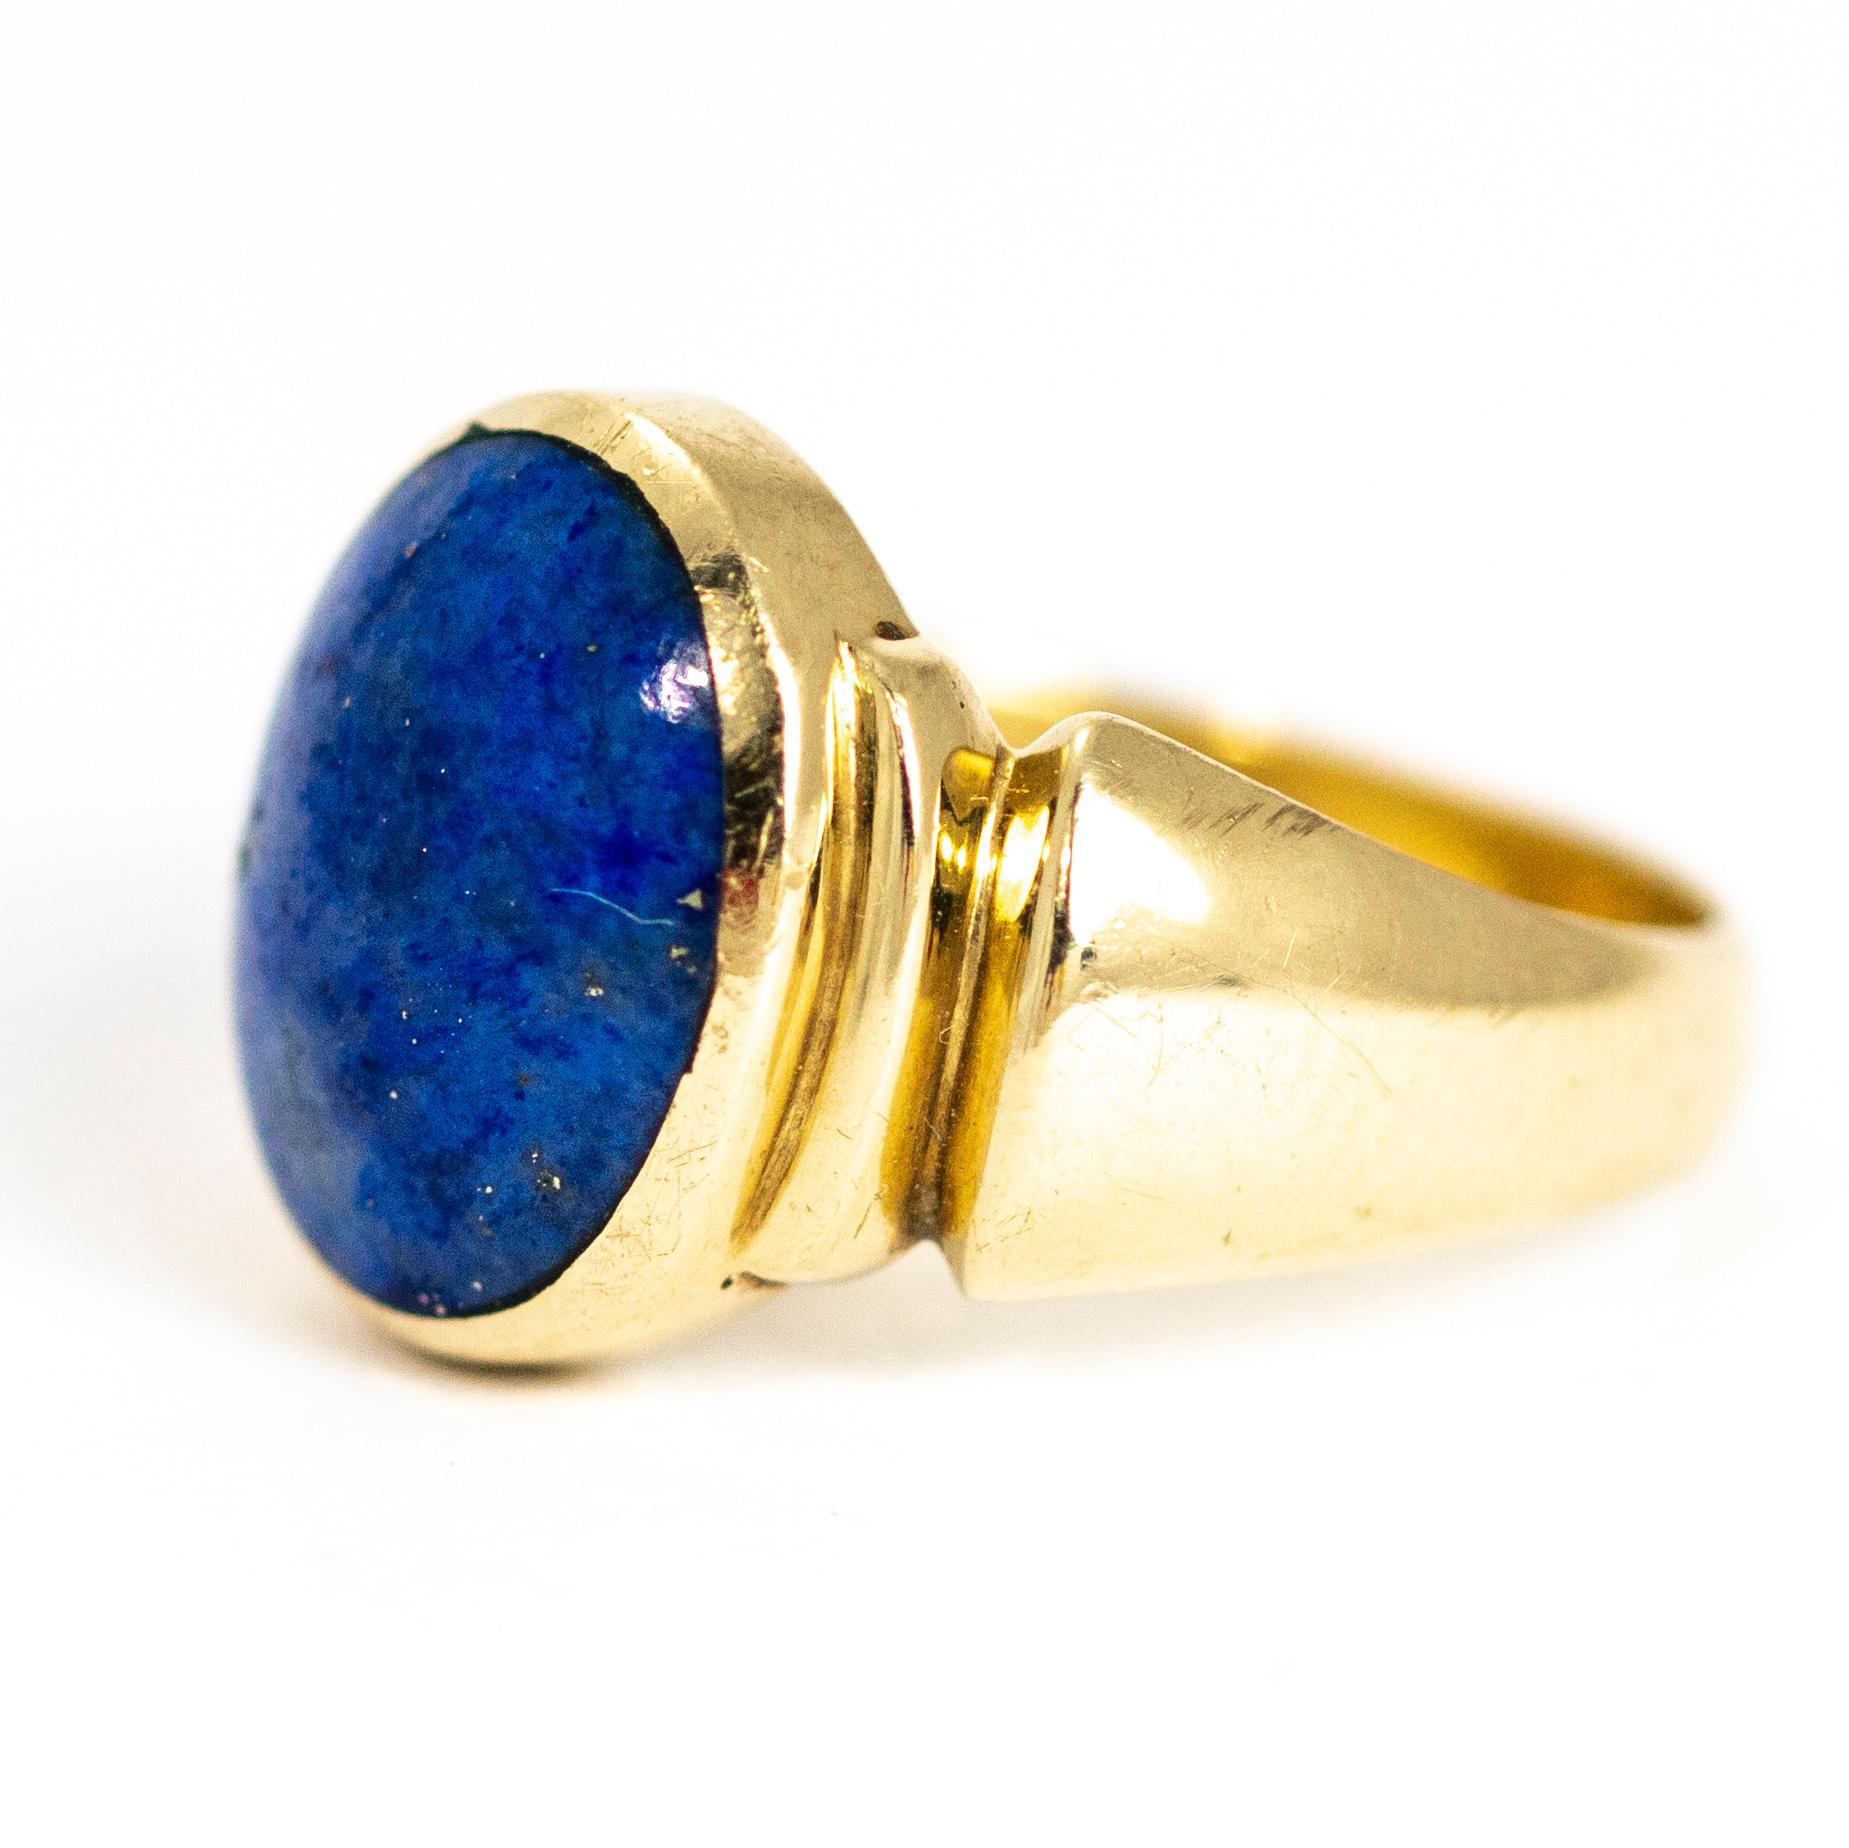 This antique signet ring was crafted in 1914. It is set with a beautiful large lapis lazuli cabochon between stunning stepped shoulders. Modelled in 9 carat yellow gold.

Fully hallmarked 1914 Sheffield, England

Ring Size: N or 6 3/4